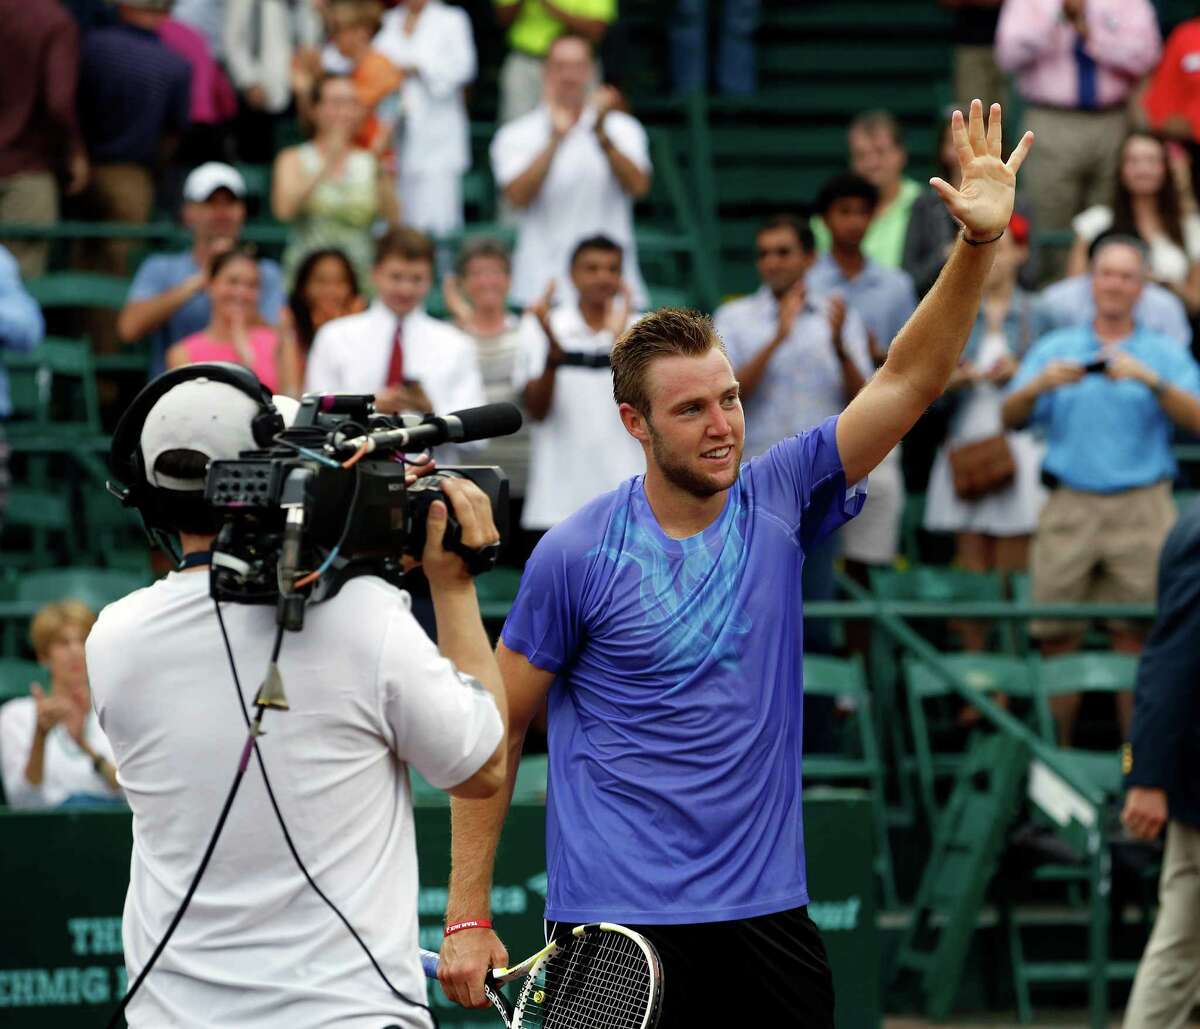 Jack Sock will be back to defend his U.S. Men's Clay Court Championship this year.